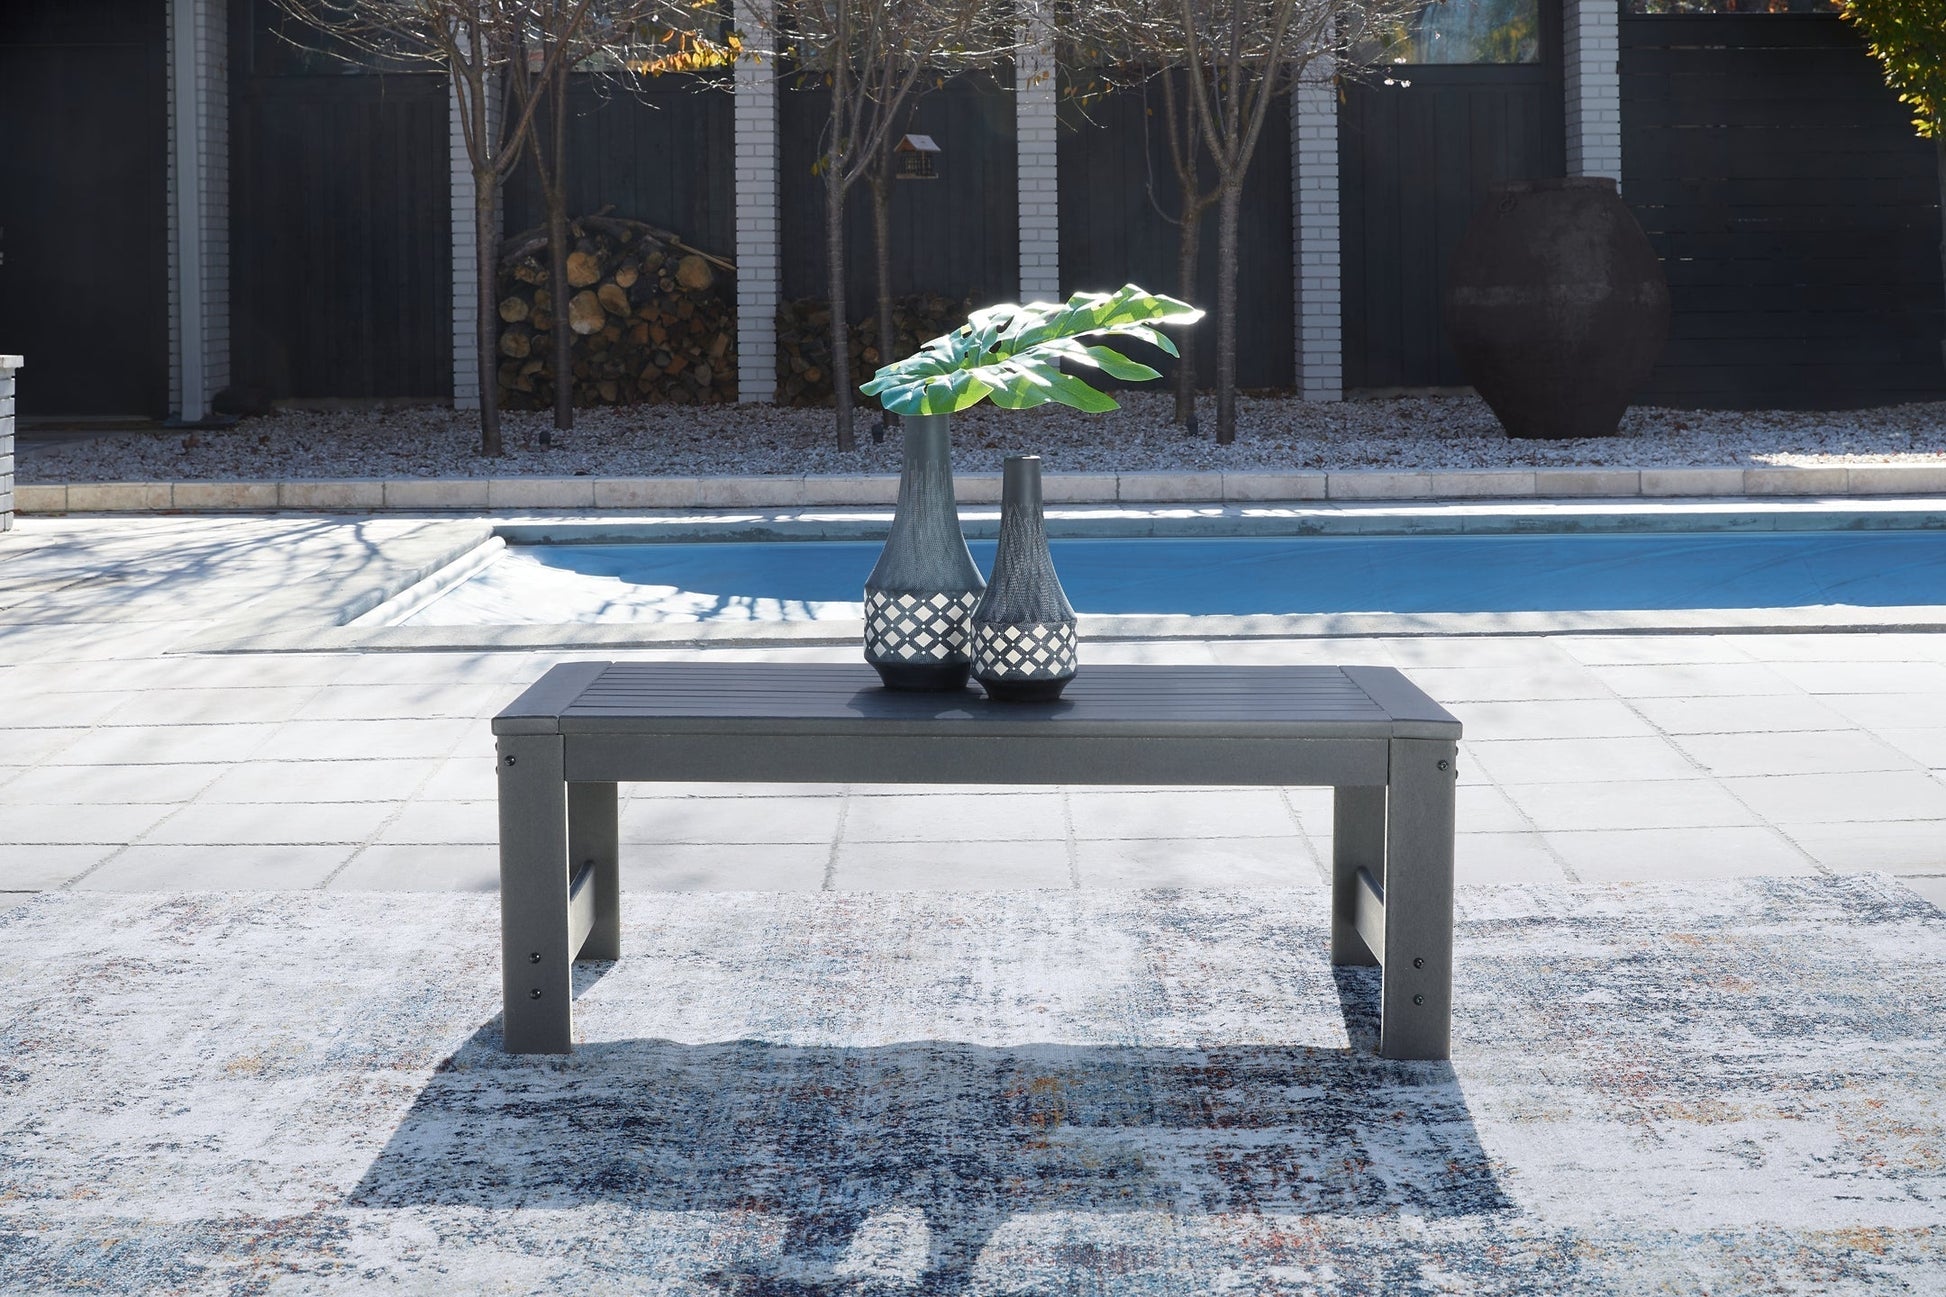 Amora Outdoor Sofa with Coffee Table at Towne & Country Furniture (AL) furniture, home furniture, home decor, sofa, bedding